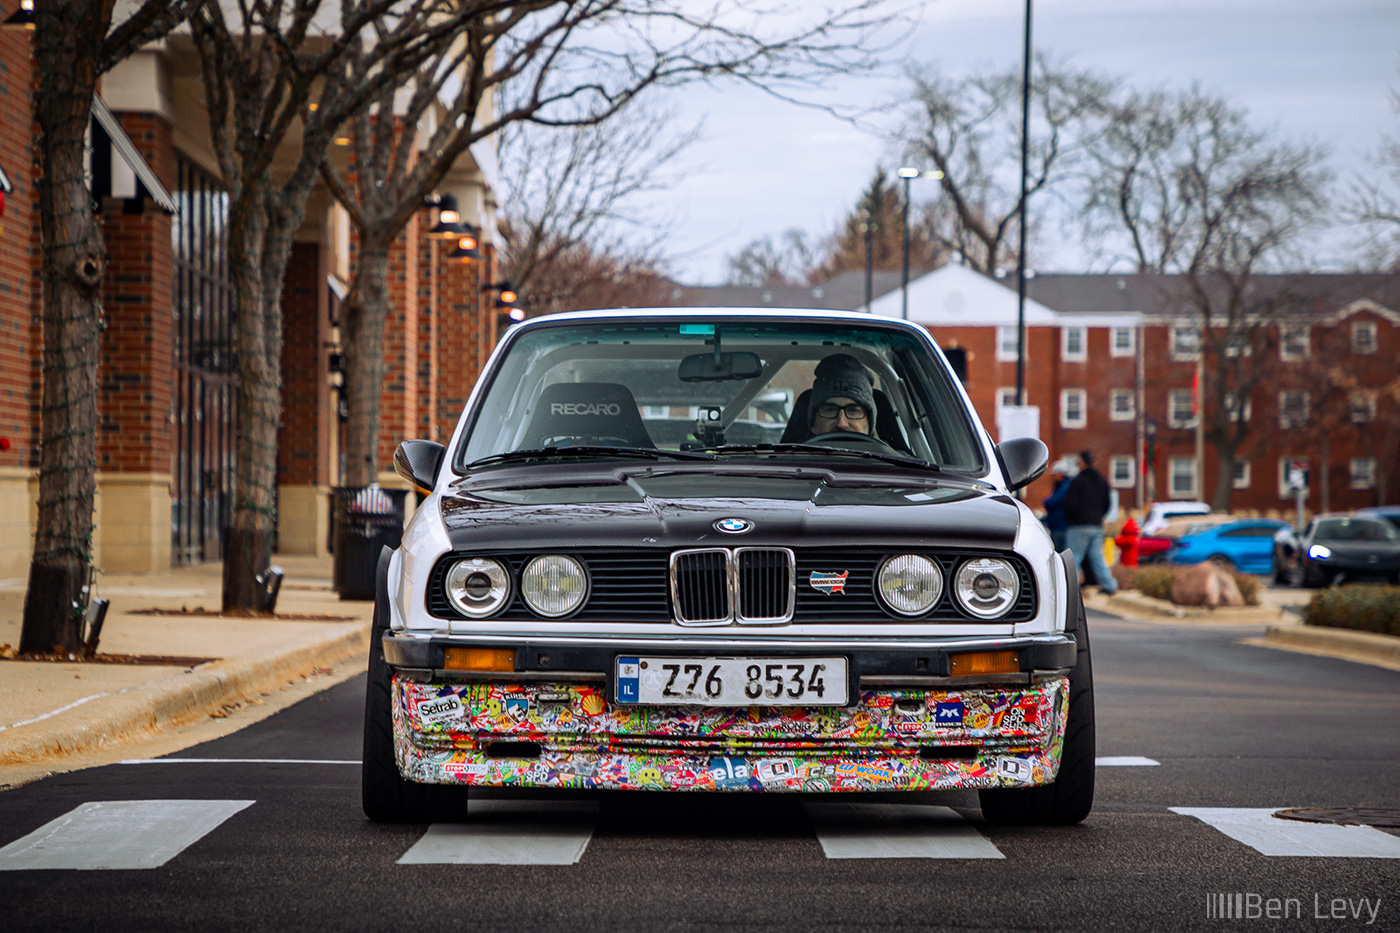 E30 BMW with Sticker-Bombed Front Lip